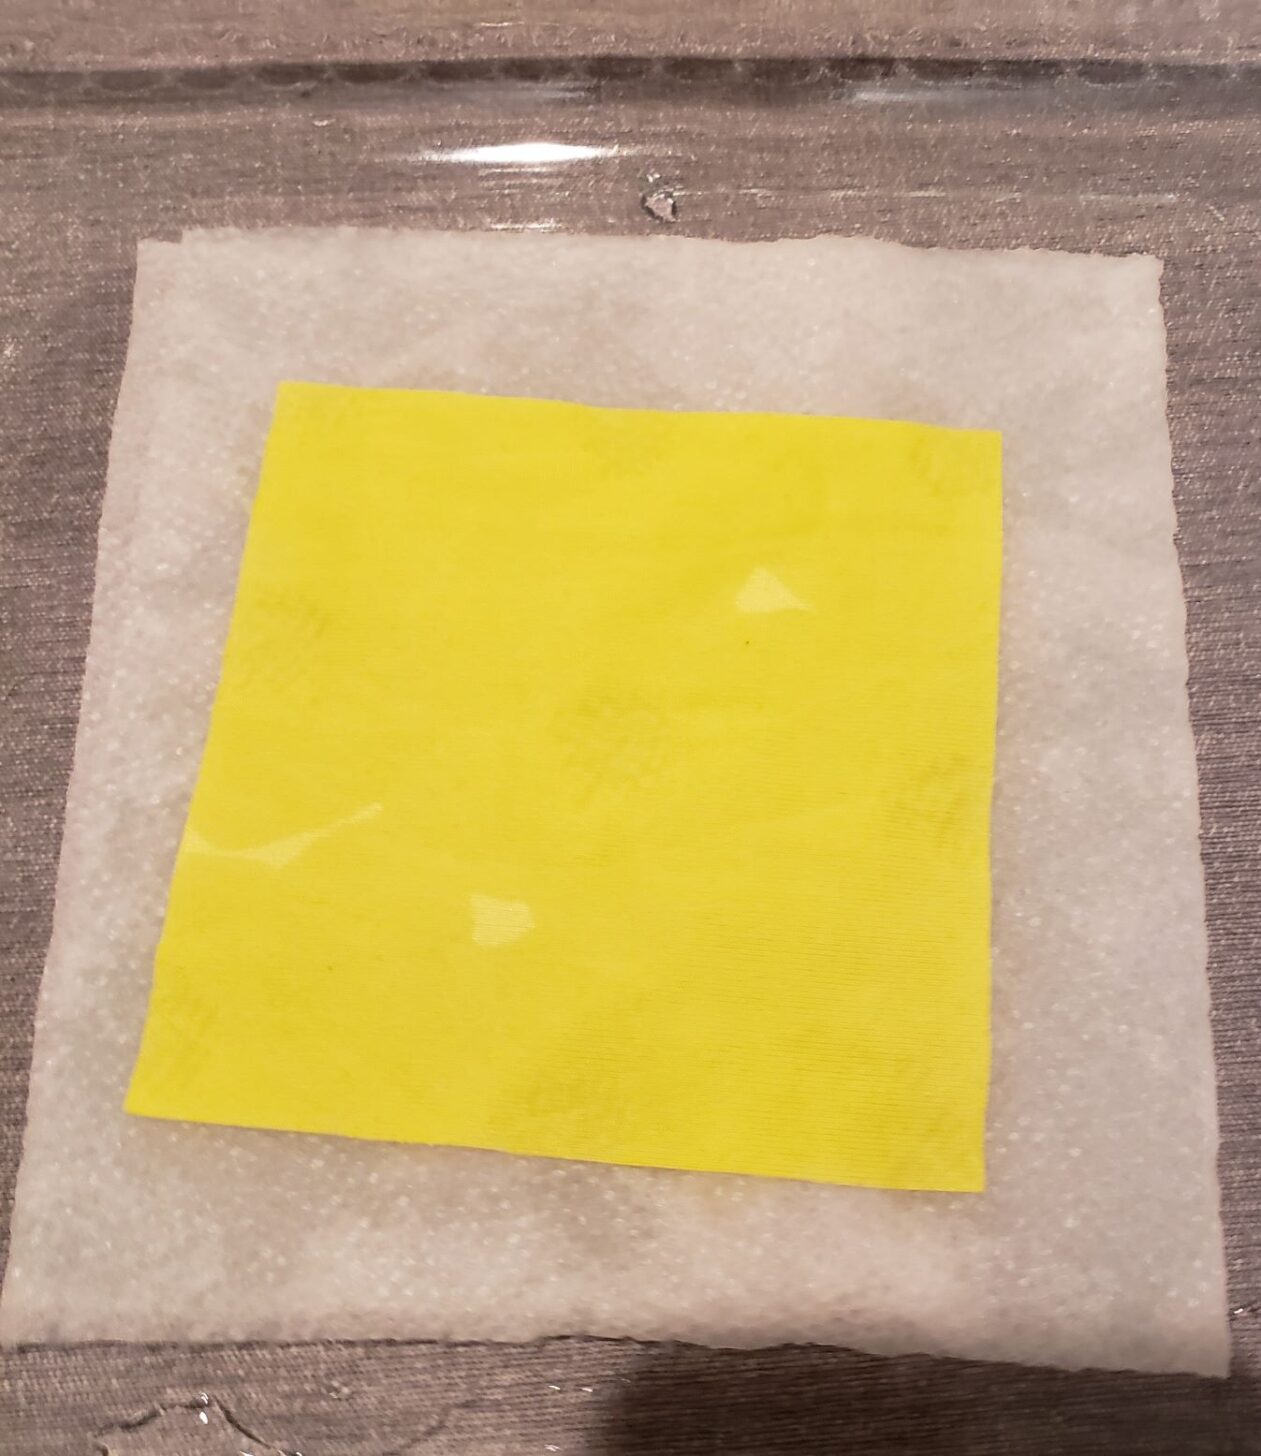 a piece of yellow fabric laying on a saturated paper towel